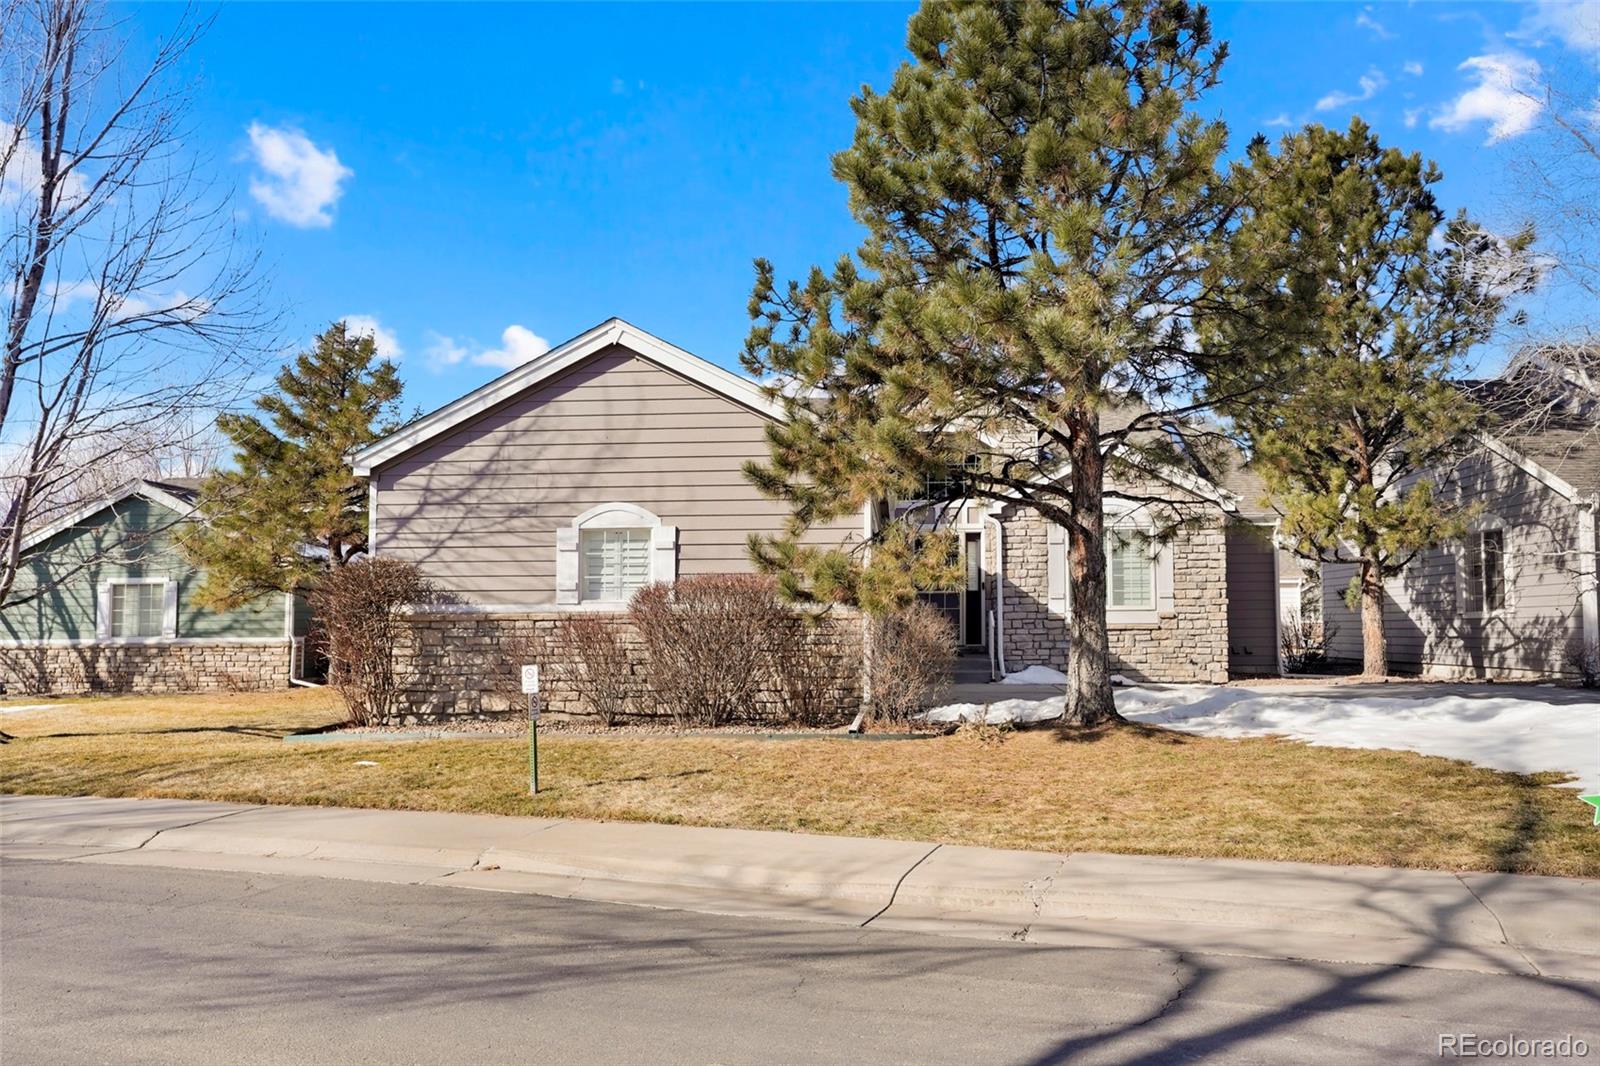 7400 w grant ranch boulevard, denver sold home. Closed on 2024-04-19 for $710,000.